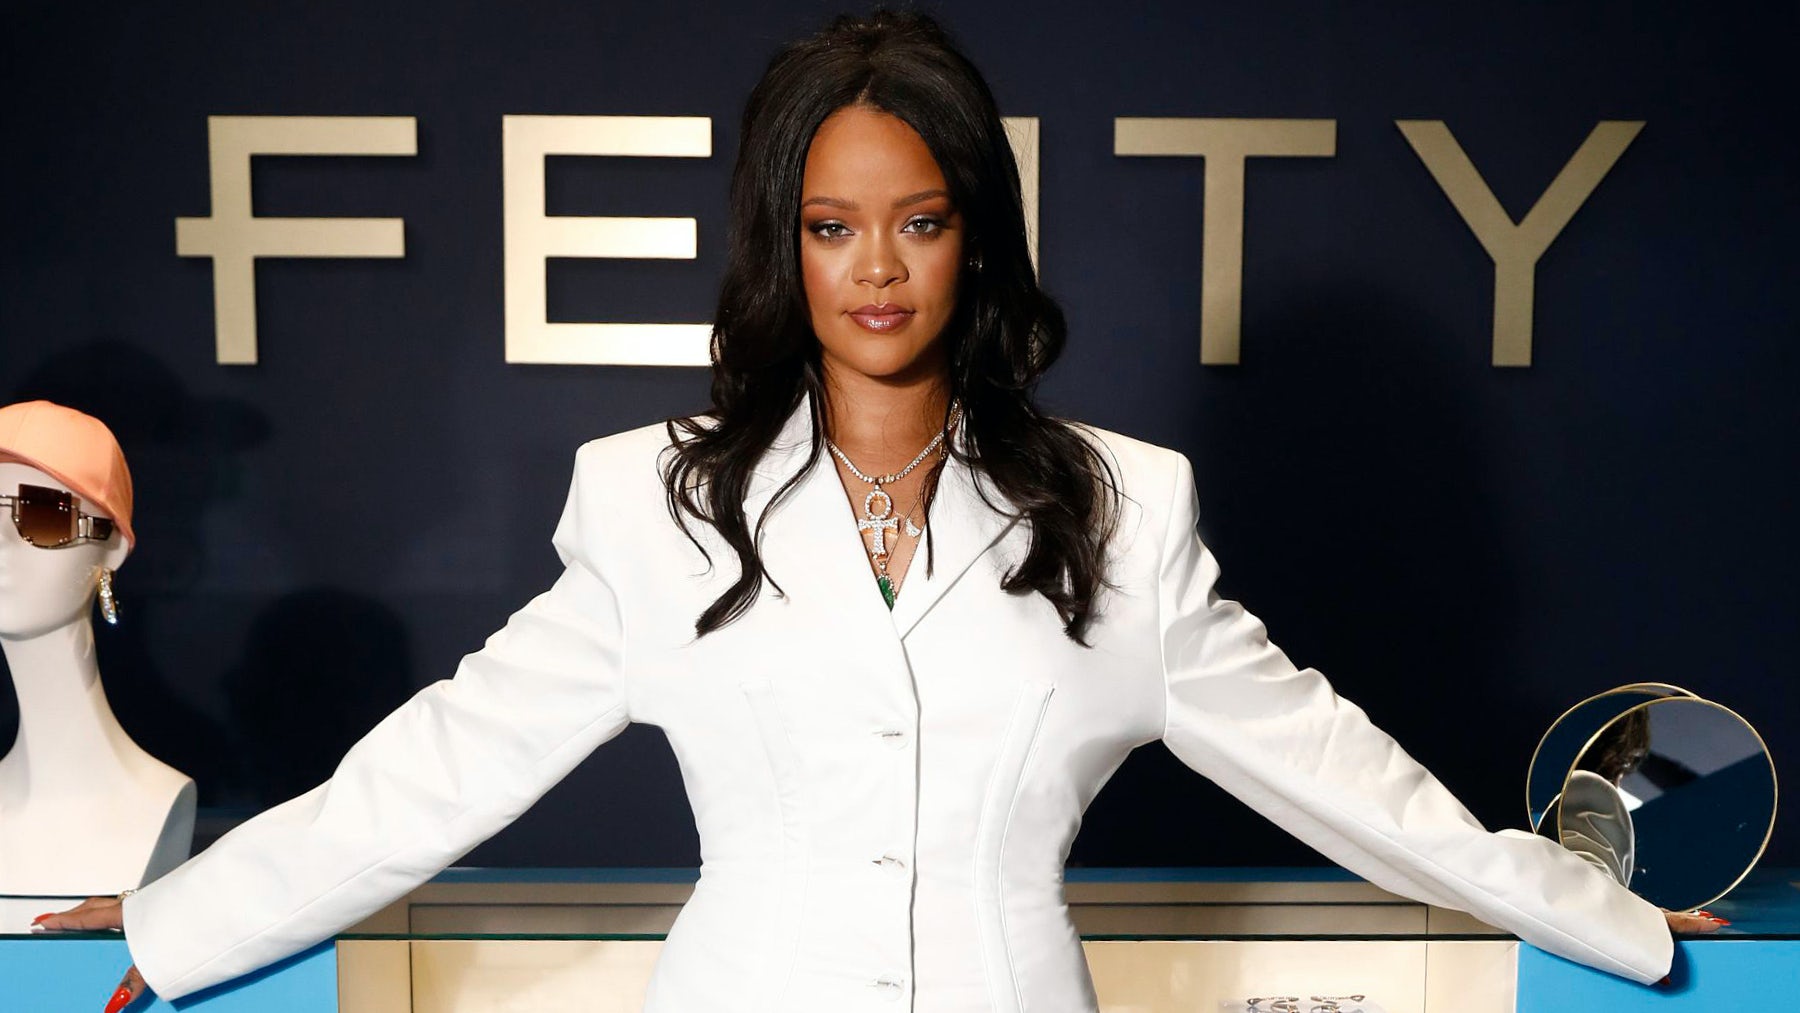 LVMH closes Rihanna's Fenty fashion line 2 years after launch - Good  Morning America